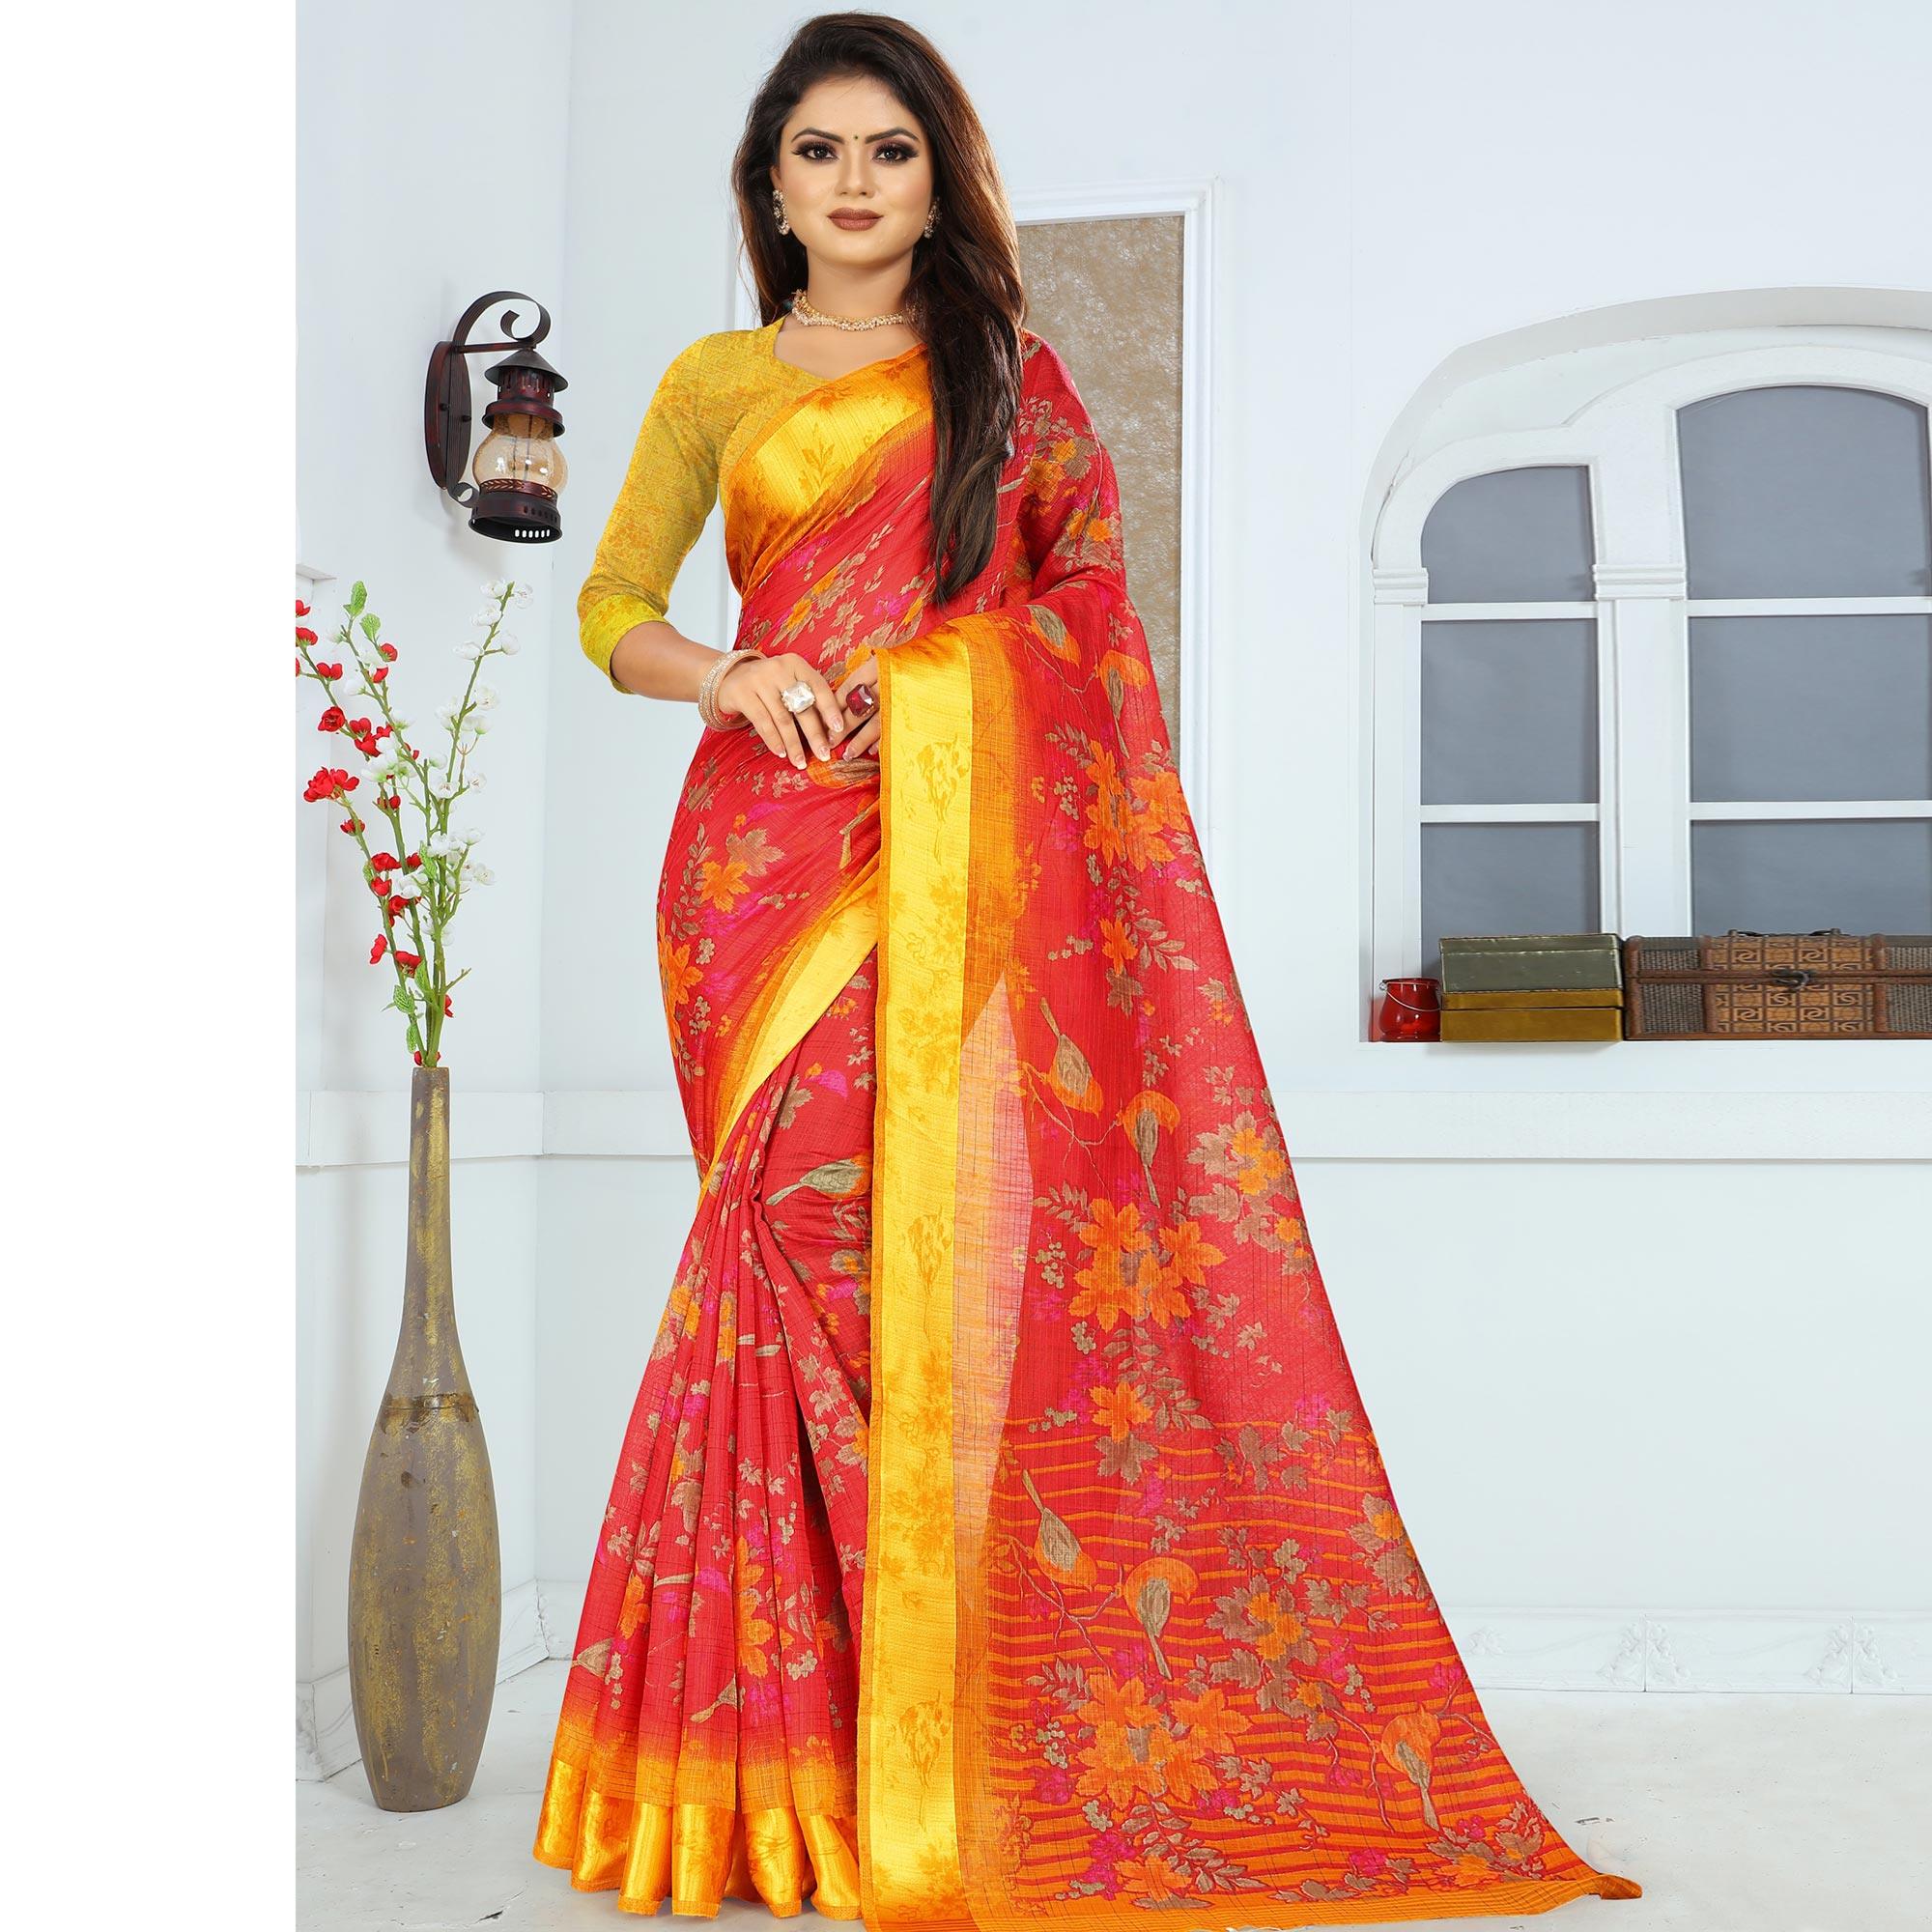 Marvellous Red Colored Casual Wear Floral Printed Linen Saree With Satin Patta Border - Peachmode